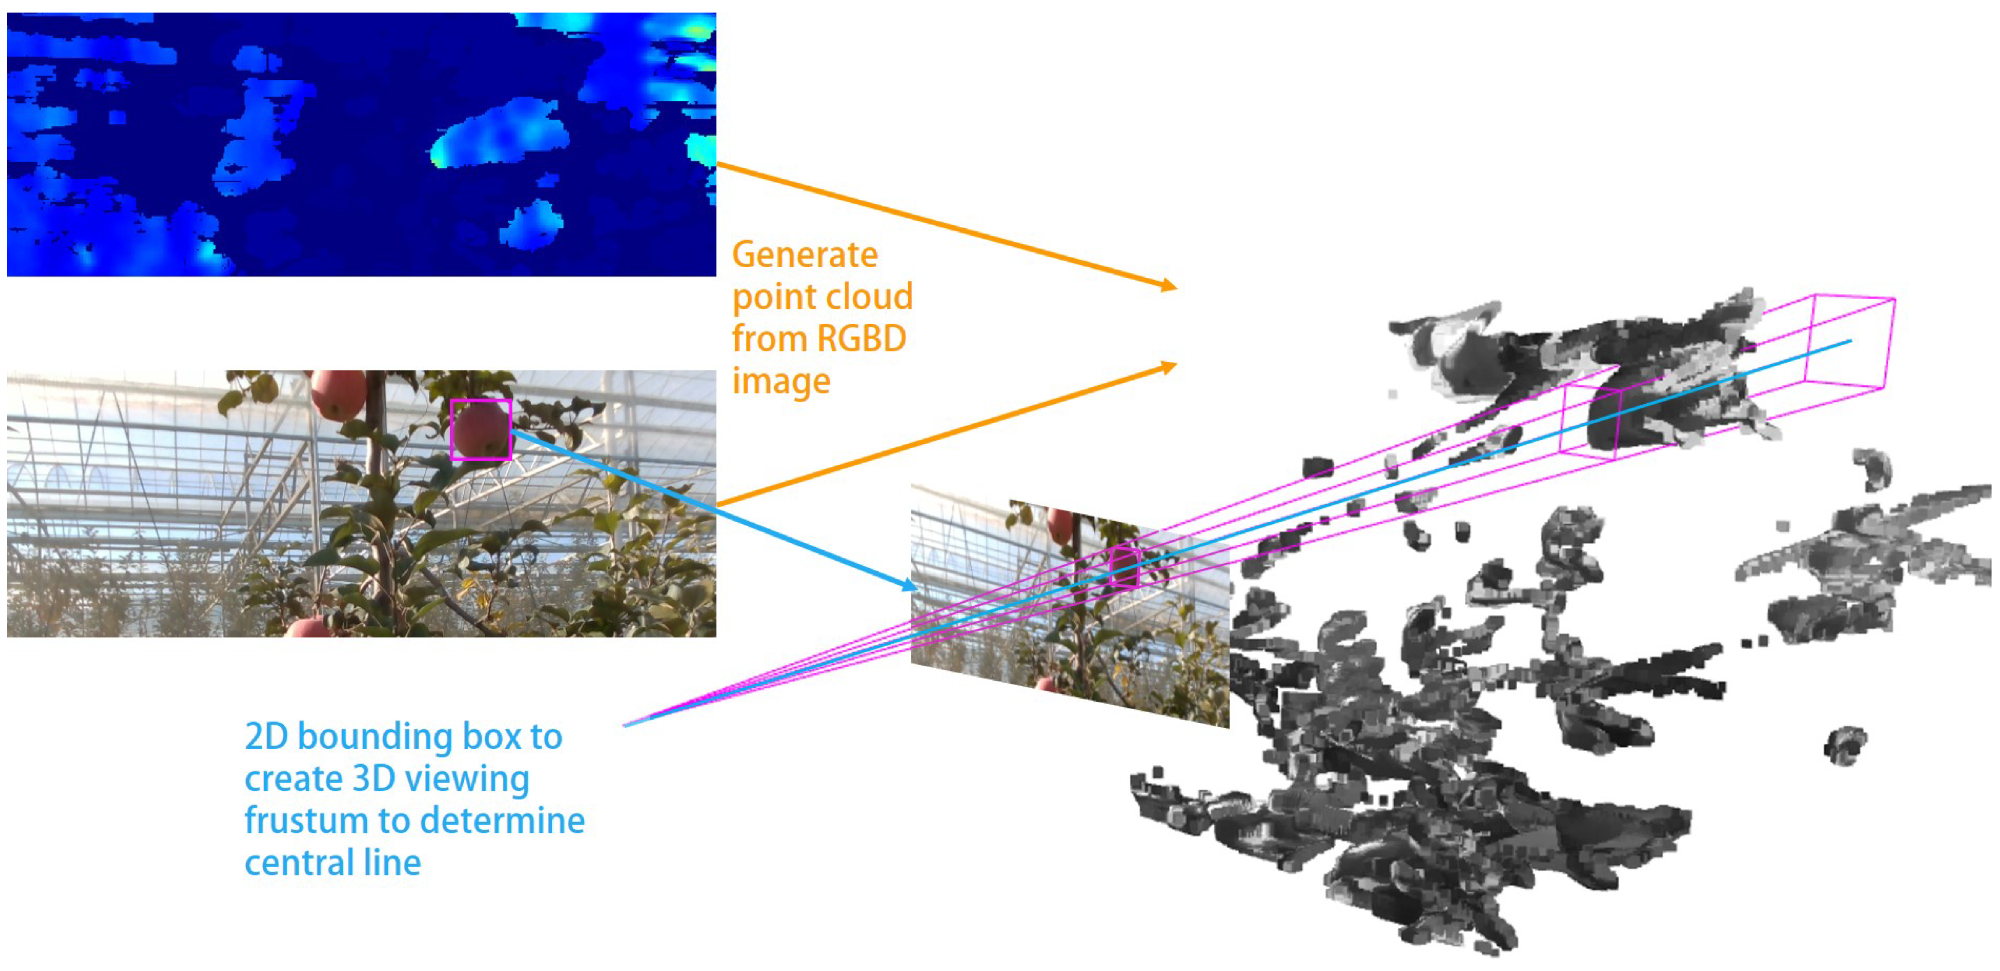 The generating process of point clouds and frustum from RGBD images.